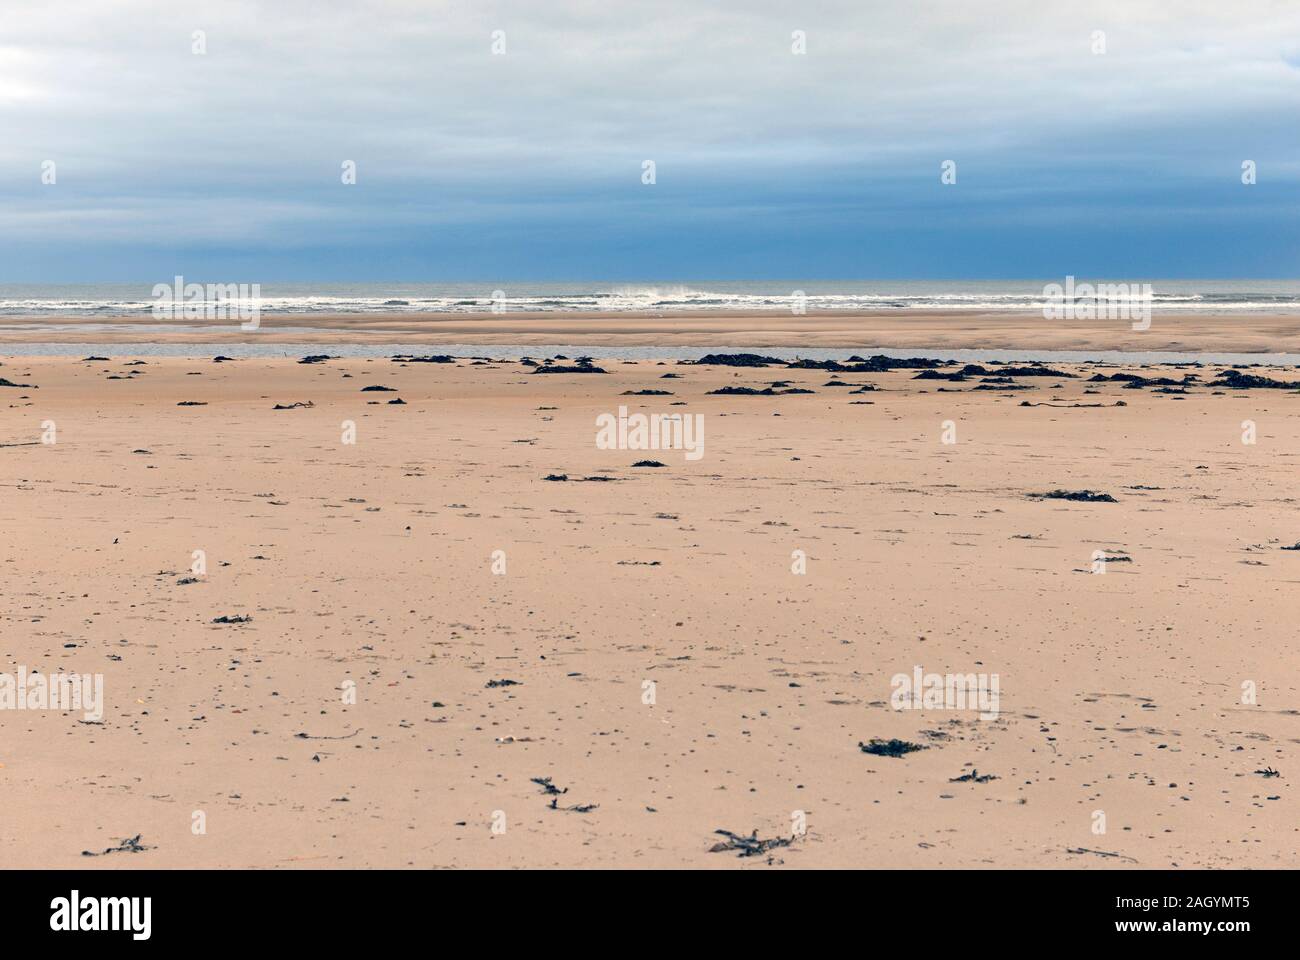 A large expanse of beach stretches out to the distant water at low tide on Alnmouth beach, Northumberland, as a storm has passed over on the horizon. Stock Photo